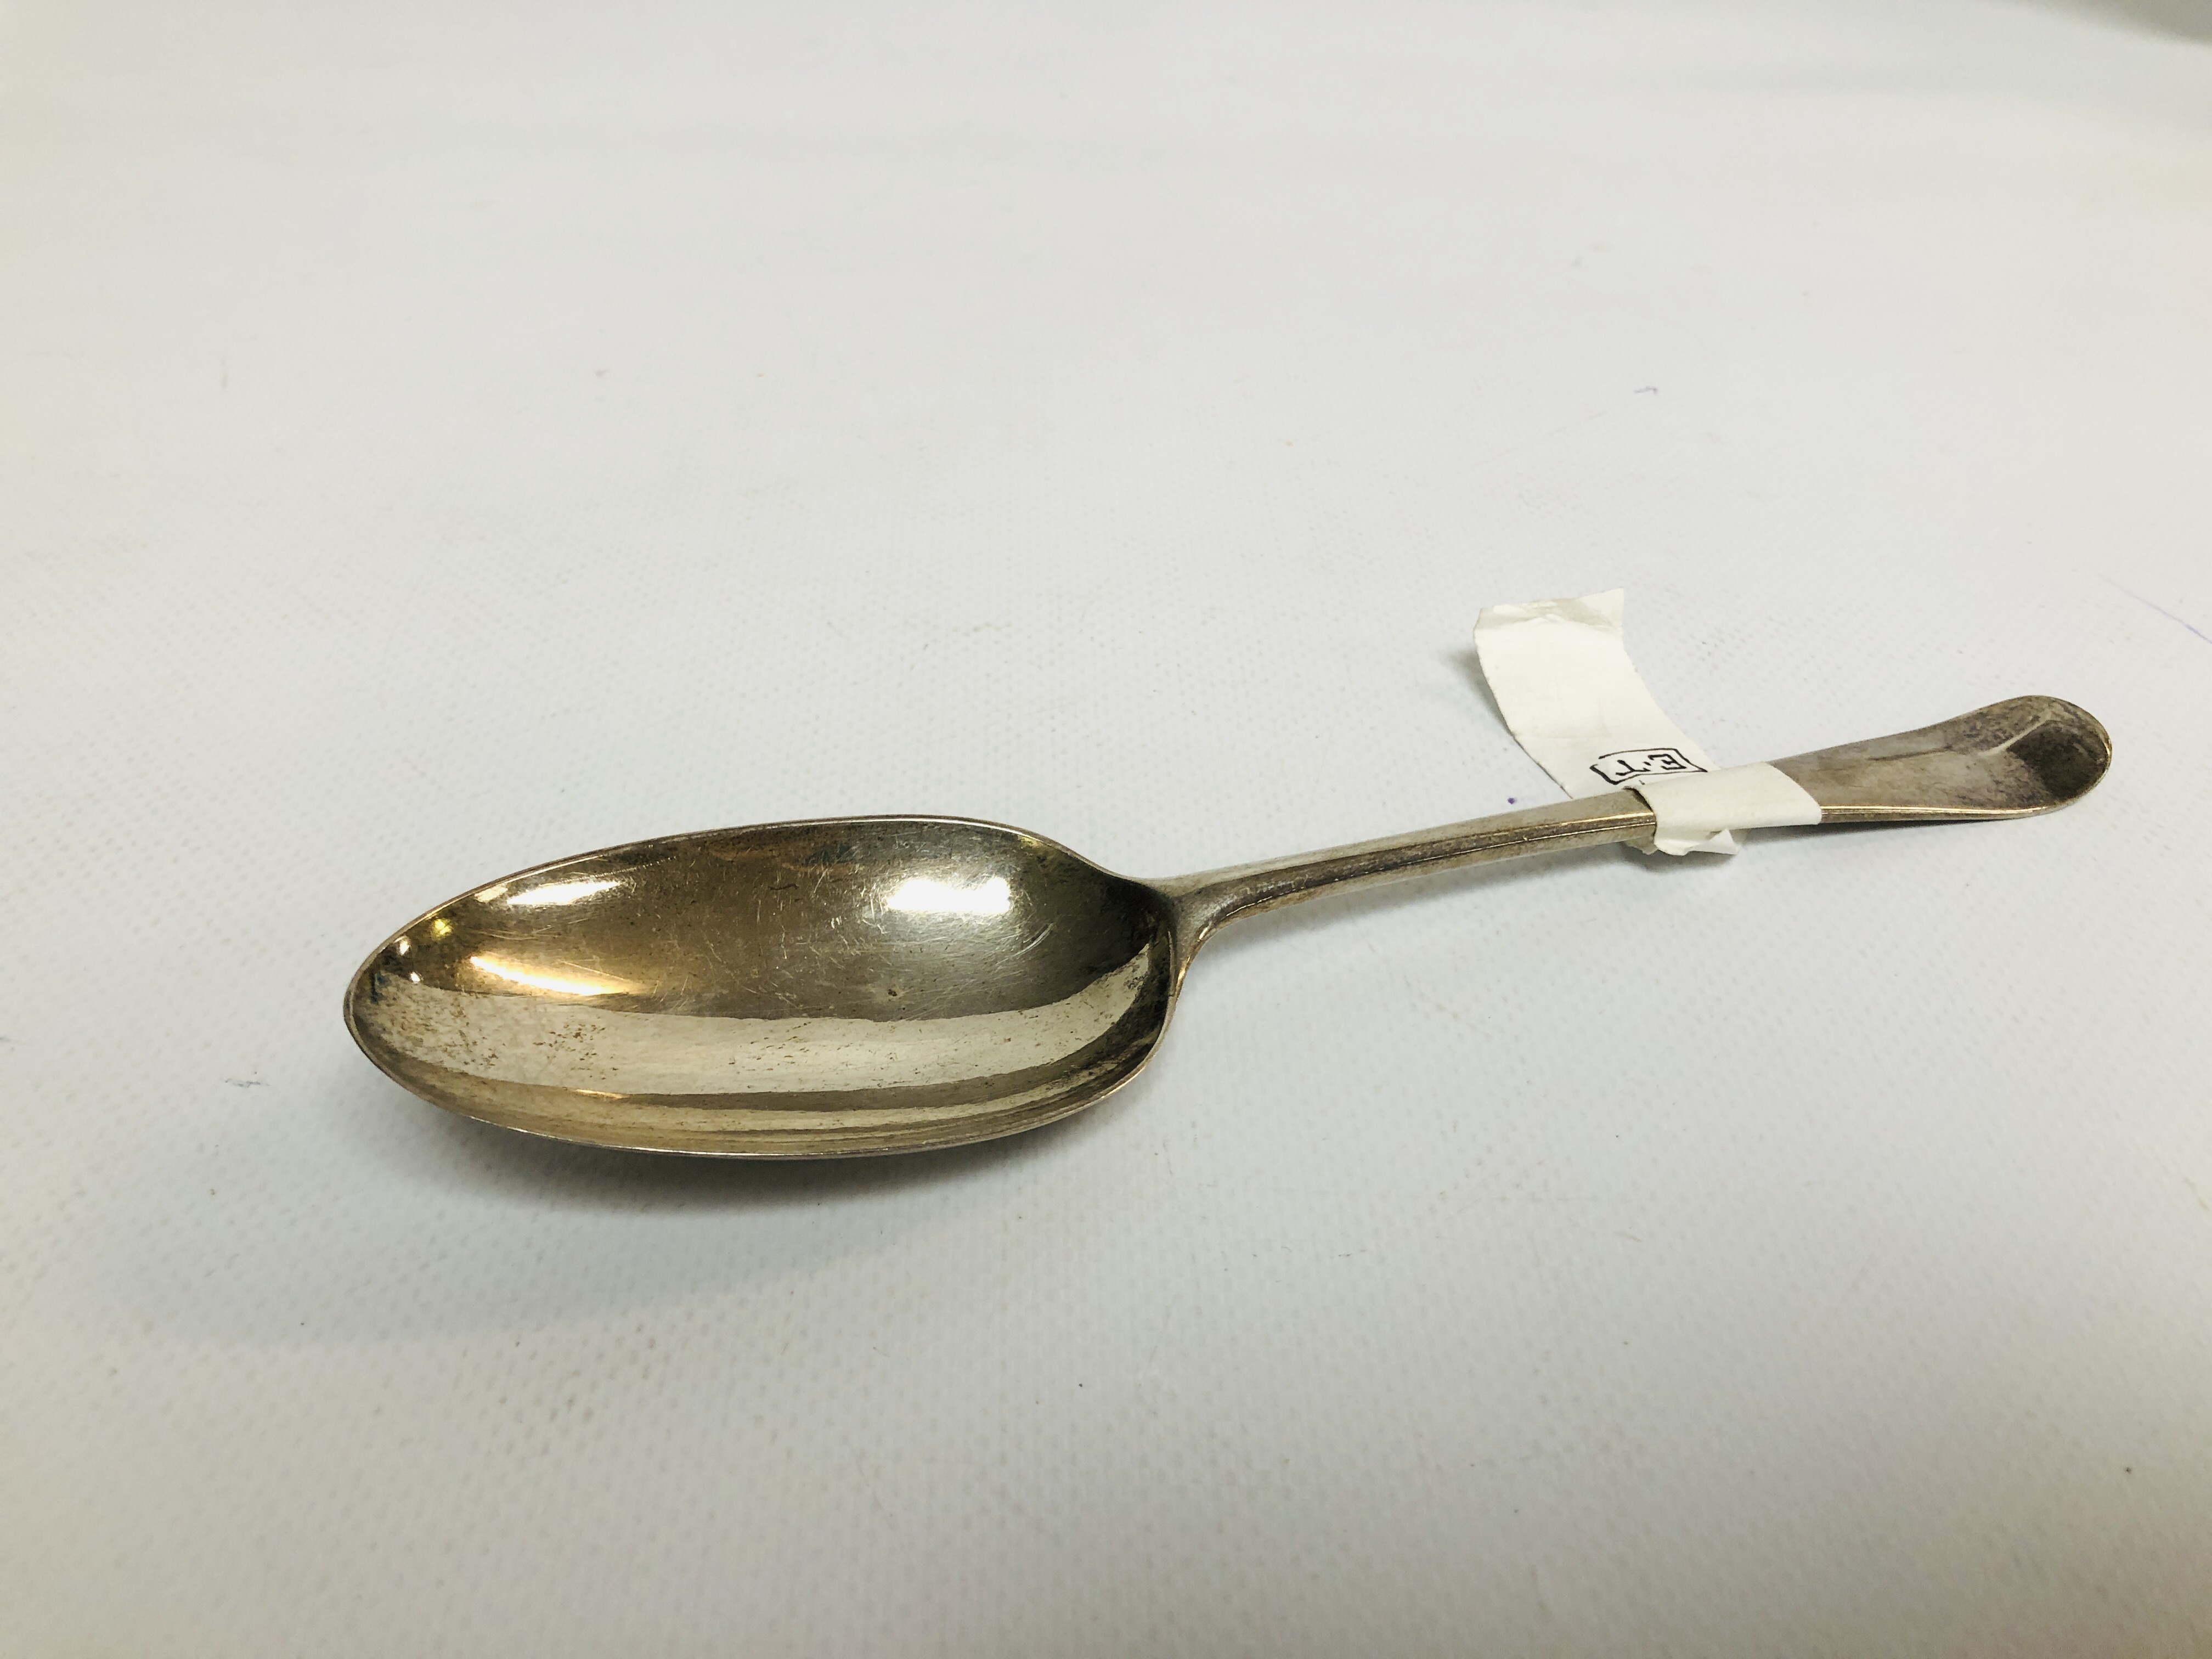 A GEORGE III SILVER HANOVERIAN PATTERN SERVING SPOON SCALLOP SHELL BACK PROBABLY BY ELIZABETH